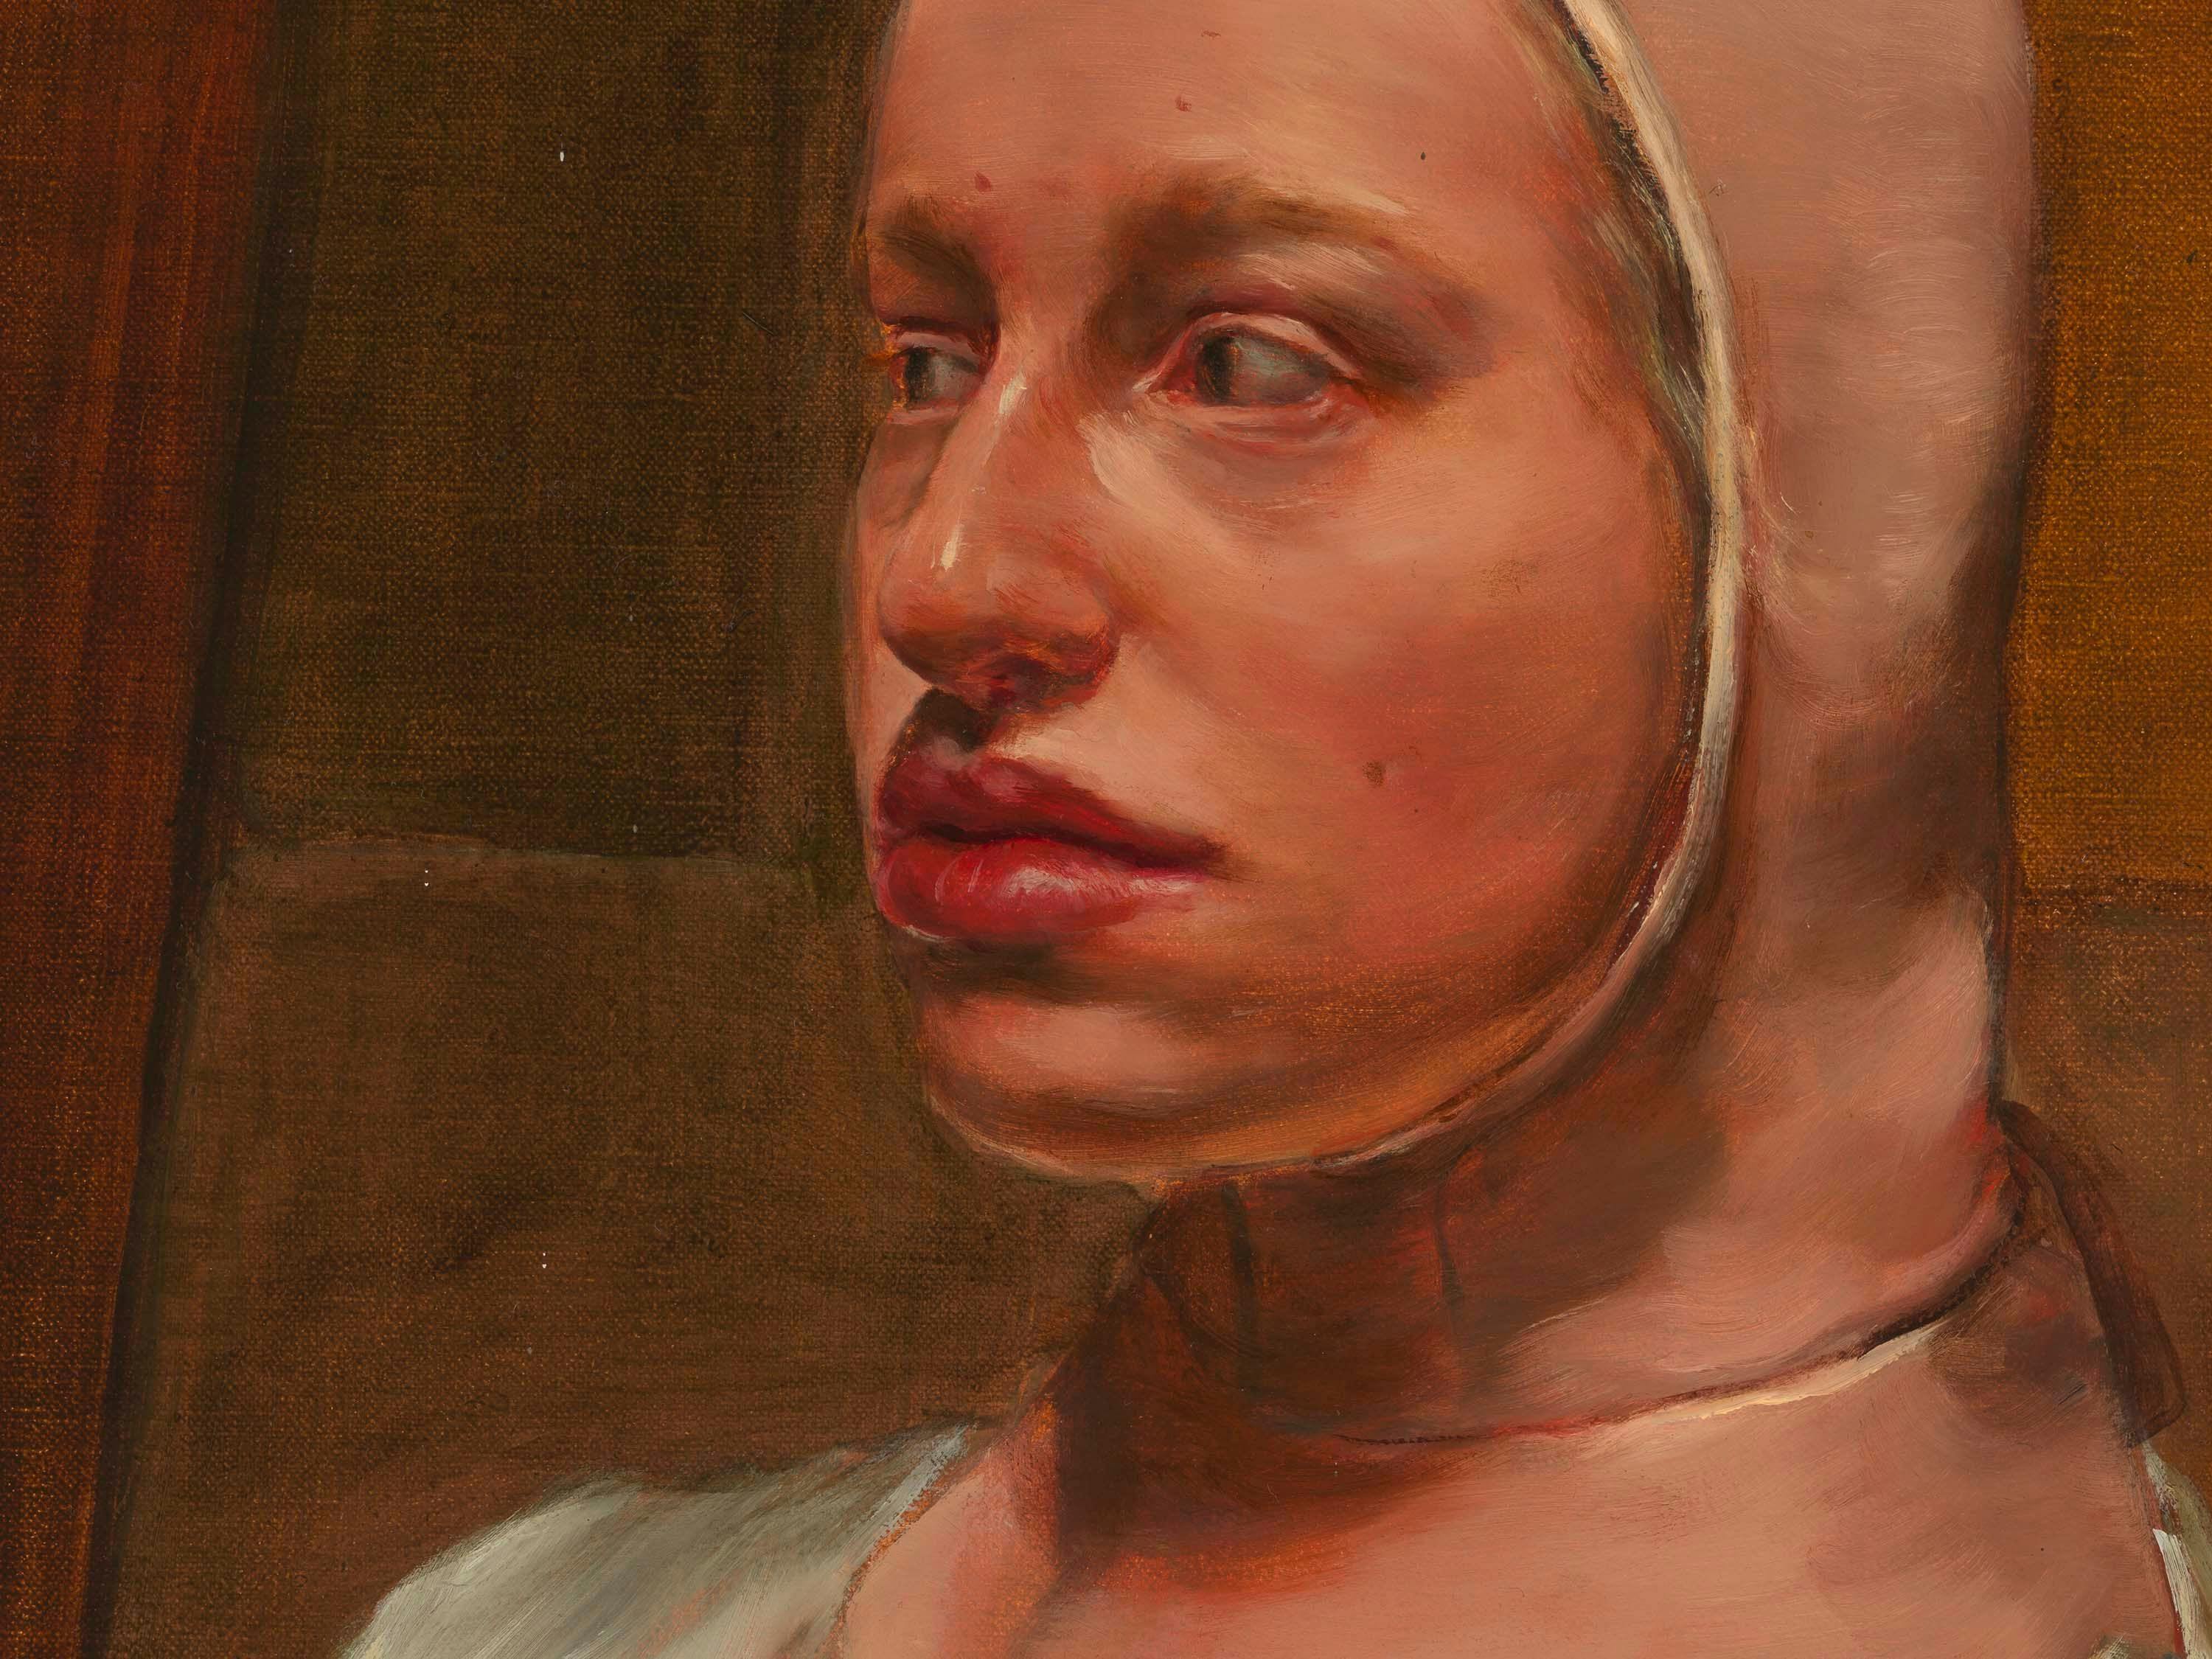 A detail from a painting by Michaël Borremans, titled The Third Double, dated 2022.